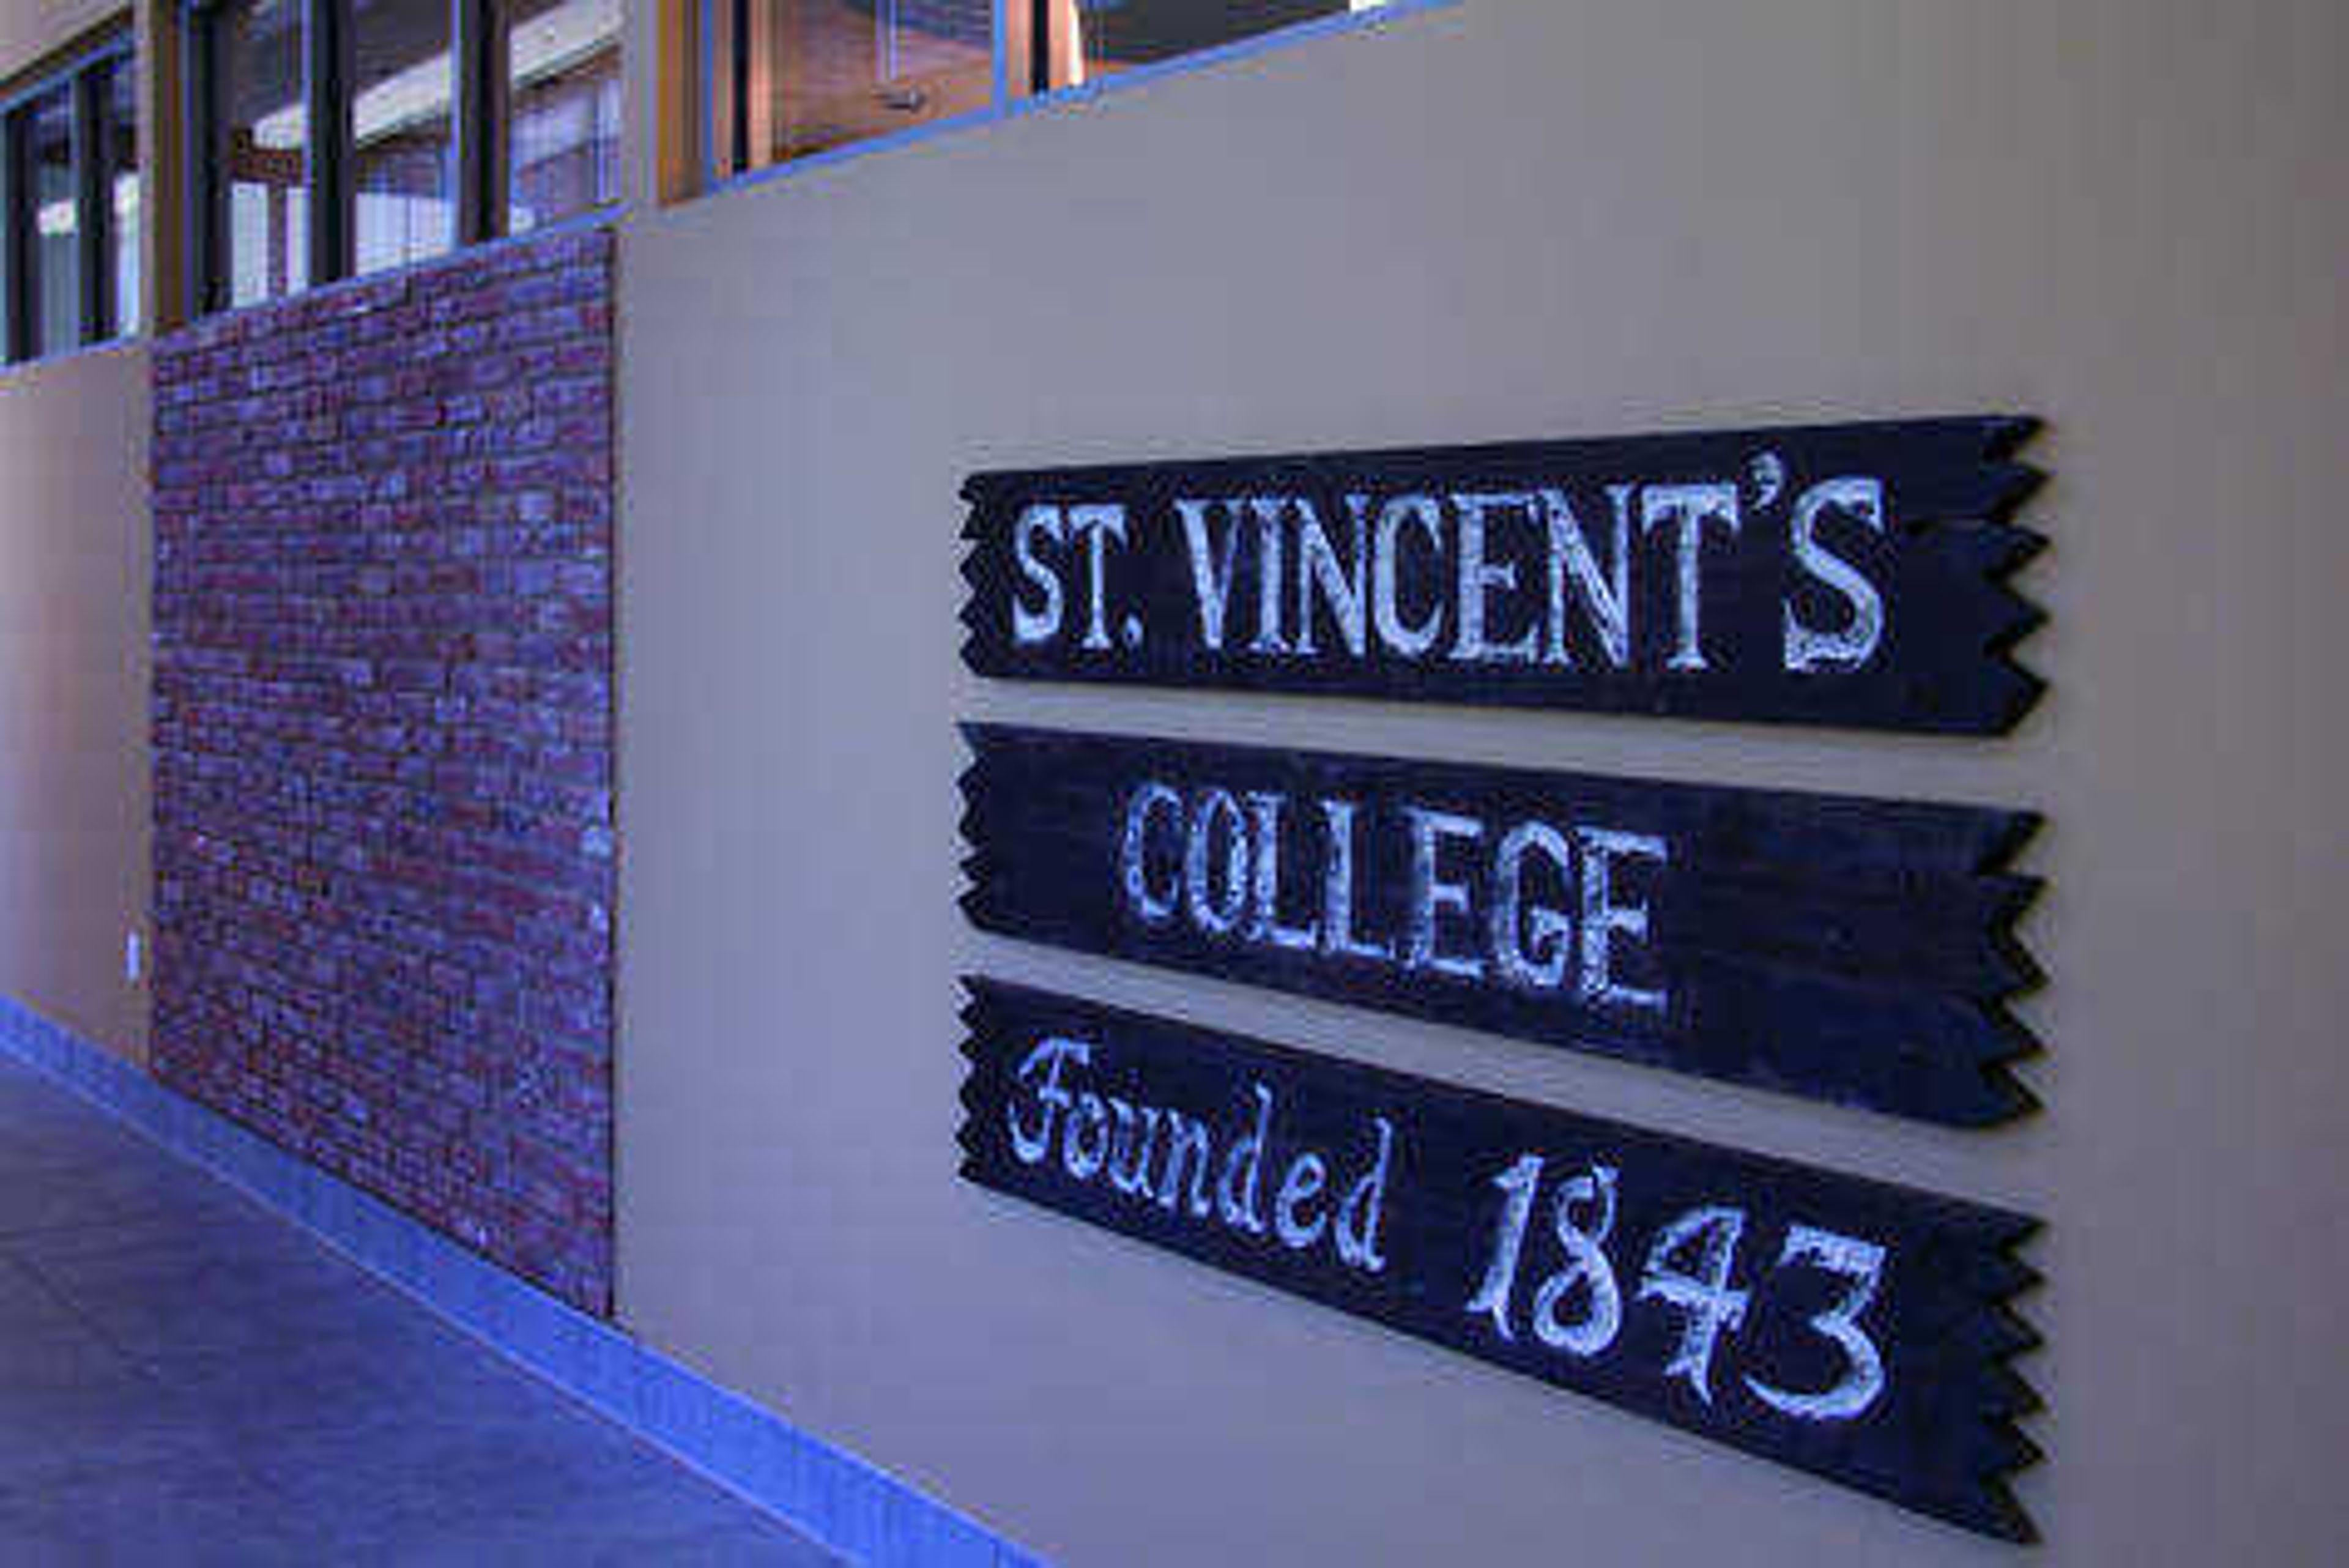 Two large pieces of the St. Vincent's College handball wall were placed in the new River Campus Center in order to preserve its history. Photo by Zarah Laurence